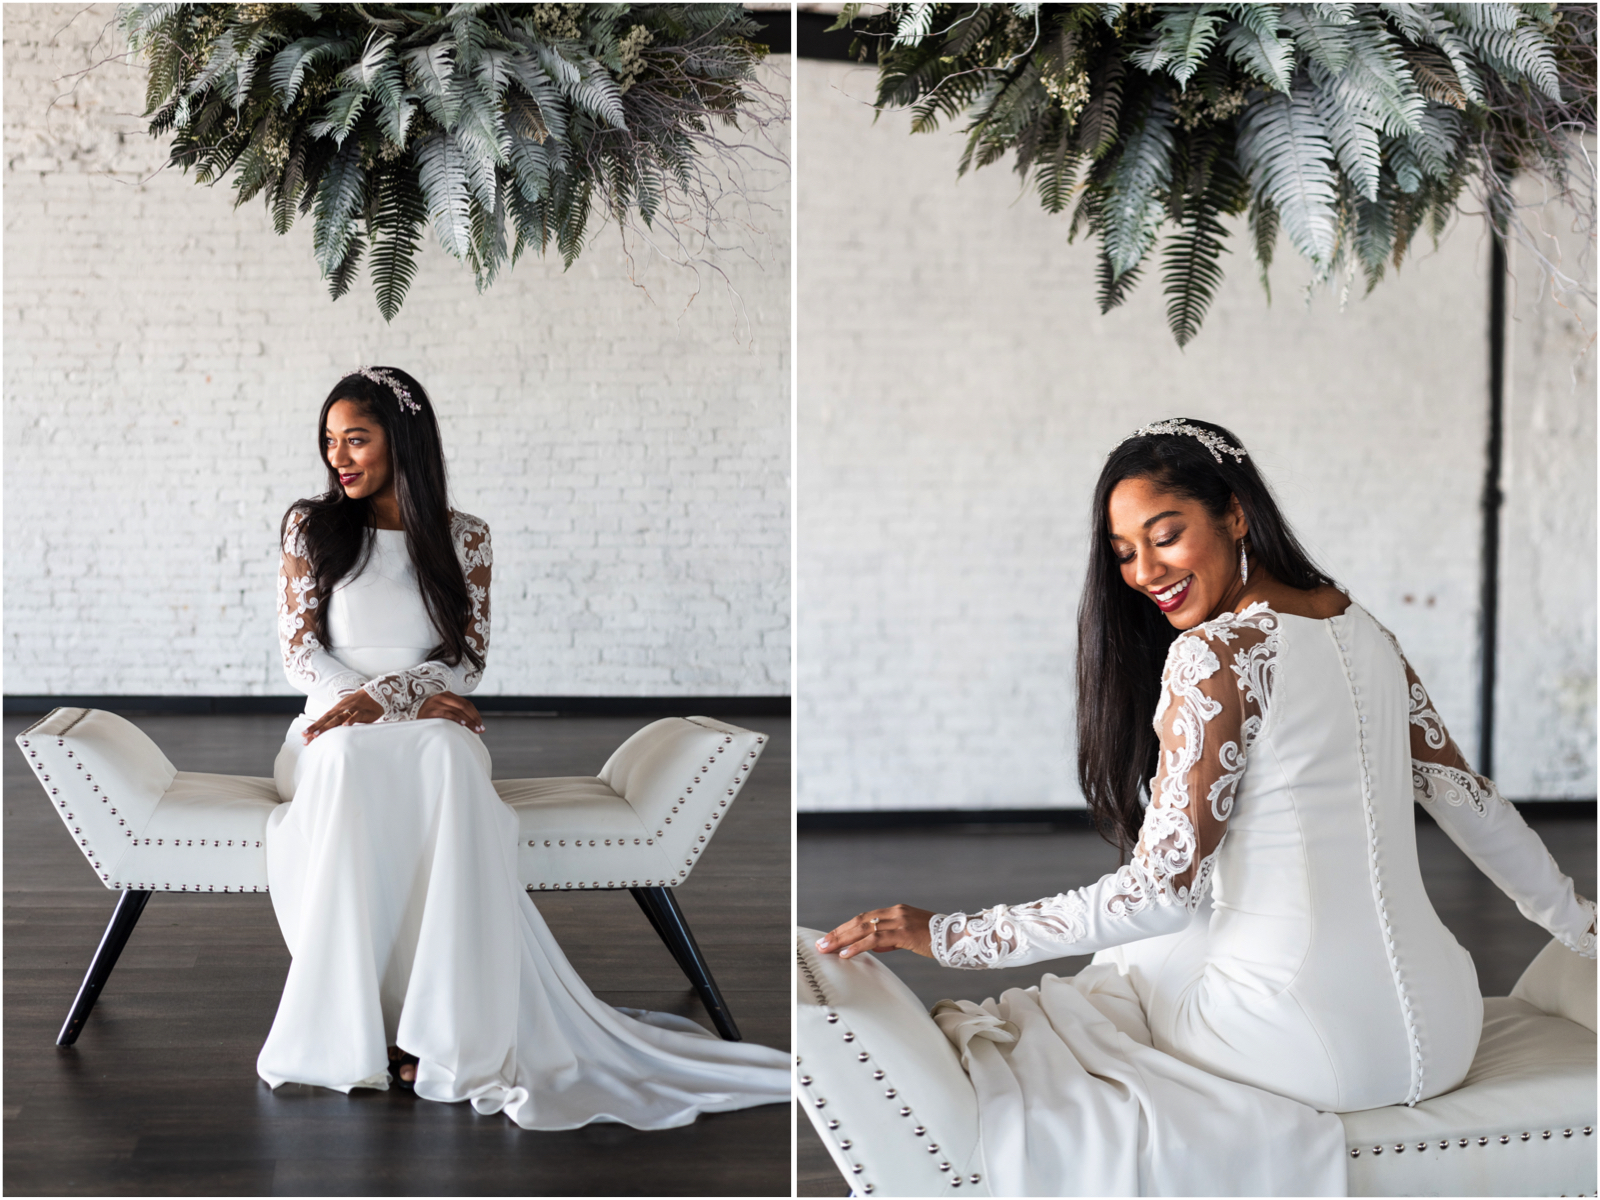 Top 10 Reasons Why You Should Book a Bridal Session